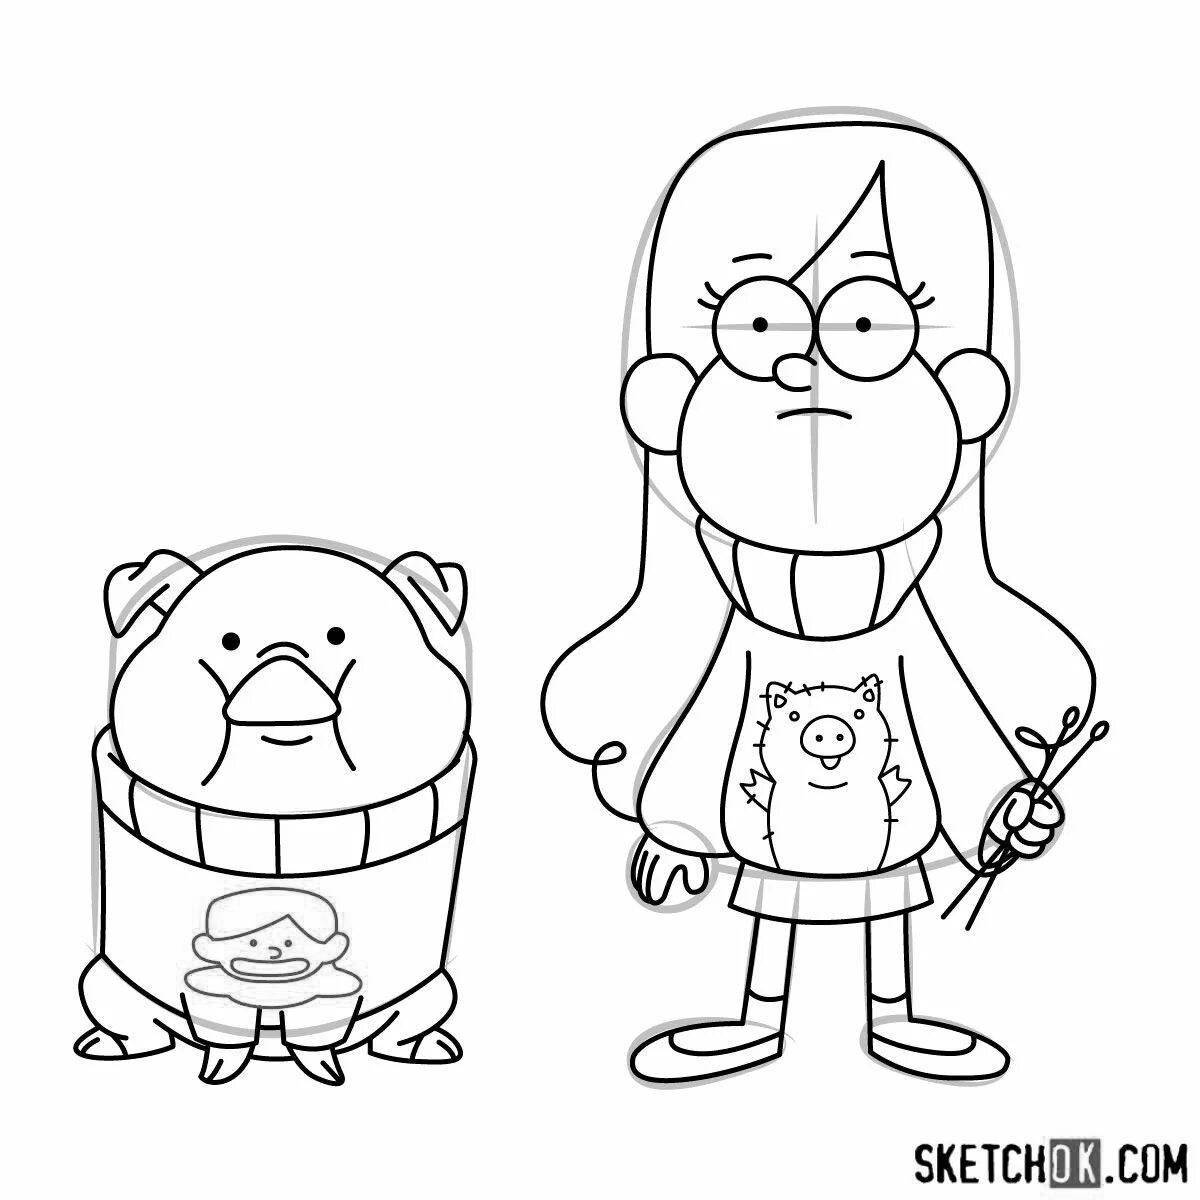 Intriguing mabel and chubby coloring book